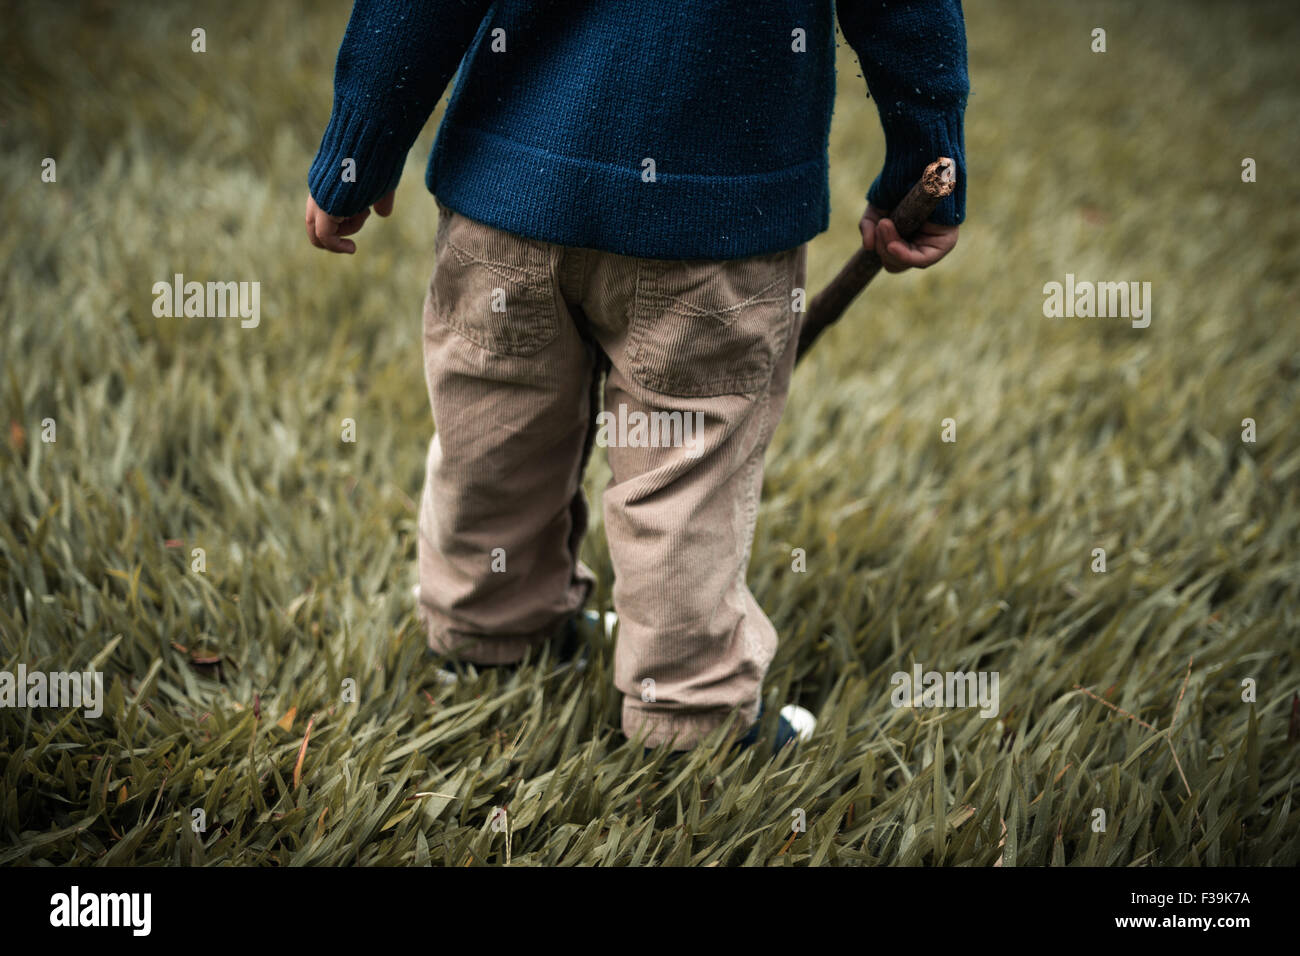 Low section of a toddler standing in field holding a wooden stick Stock Photo